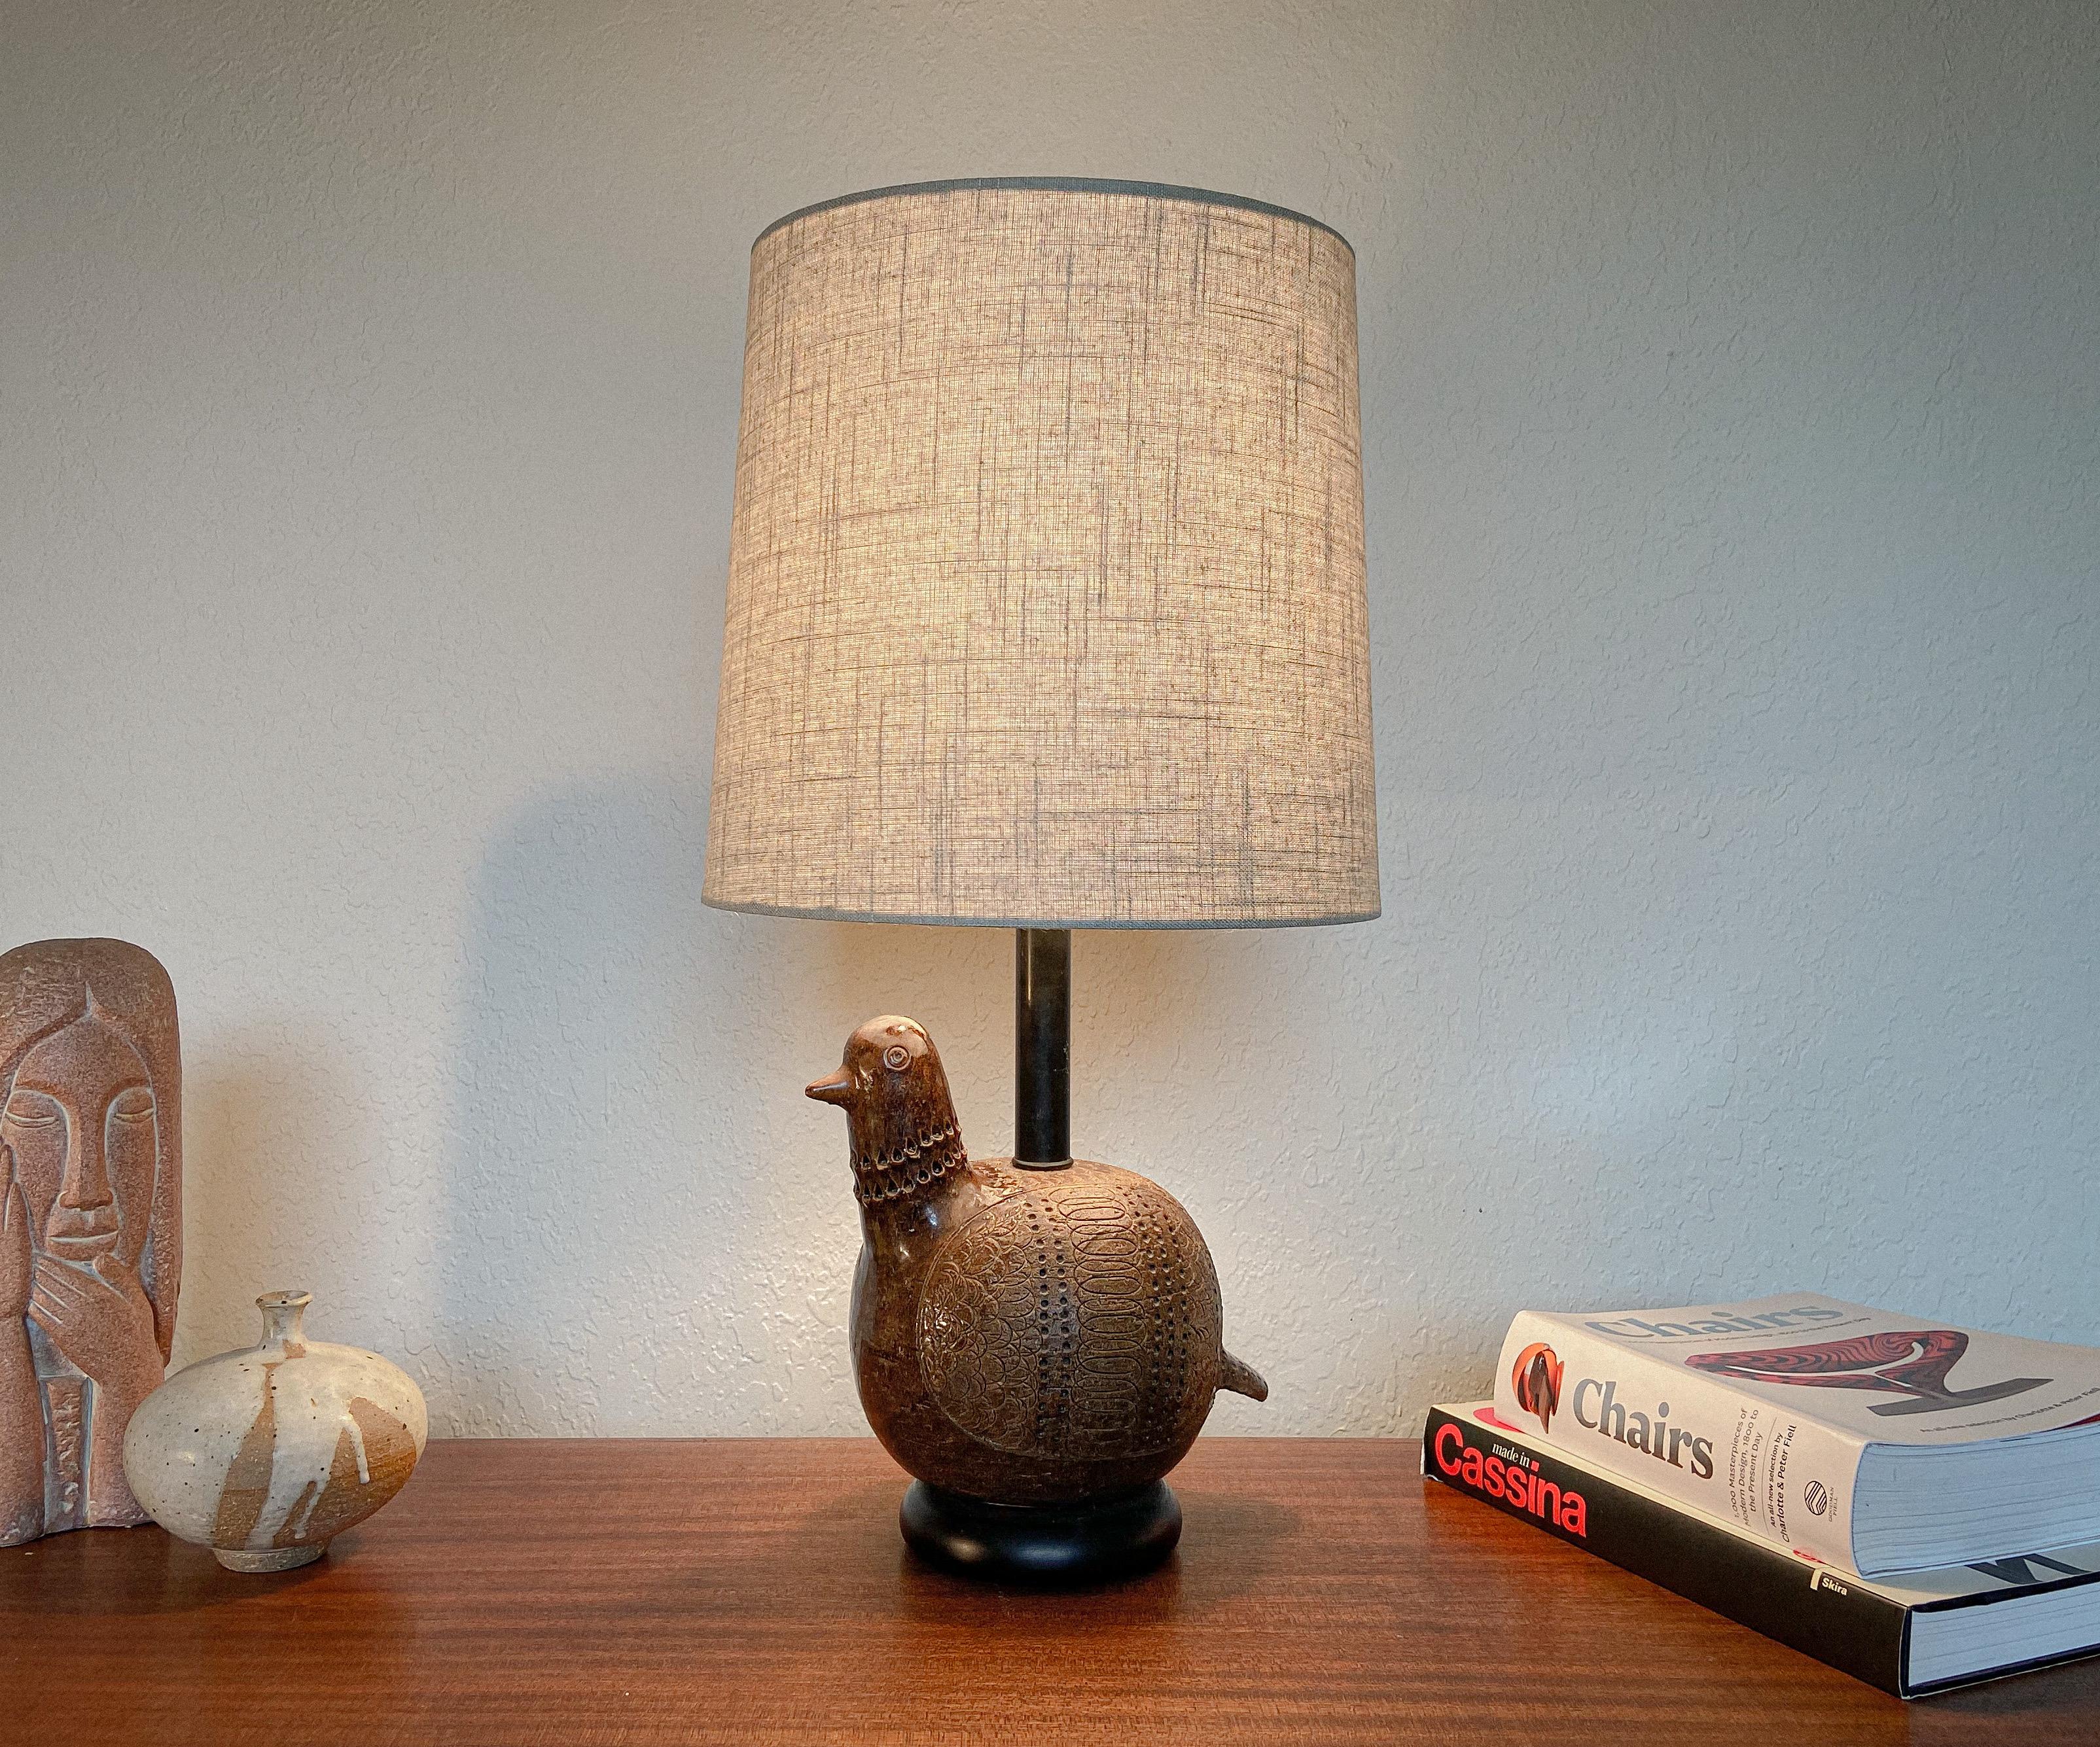 A fun and unique table lamp designed by Aldo Londi for Bitossi. Featuring a hand made, hand glazed ceramic body in the form a partridge.

A versatile lamp that will work well in a variety of settings. Fully rewired and ready to use. Shipping price